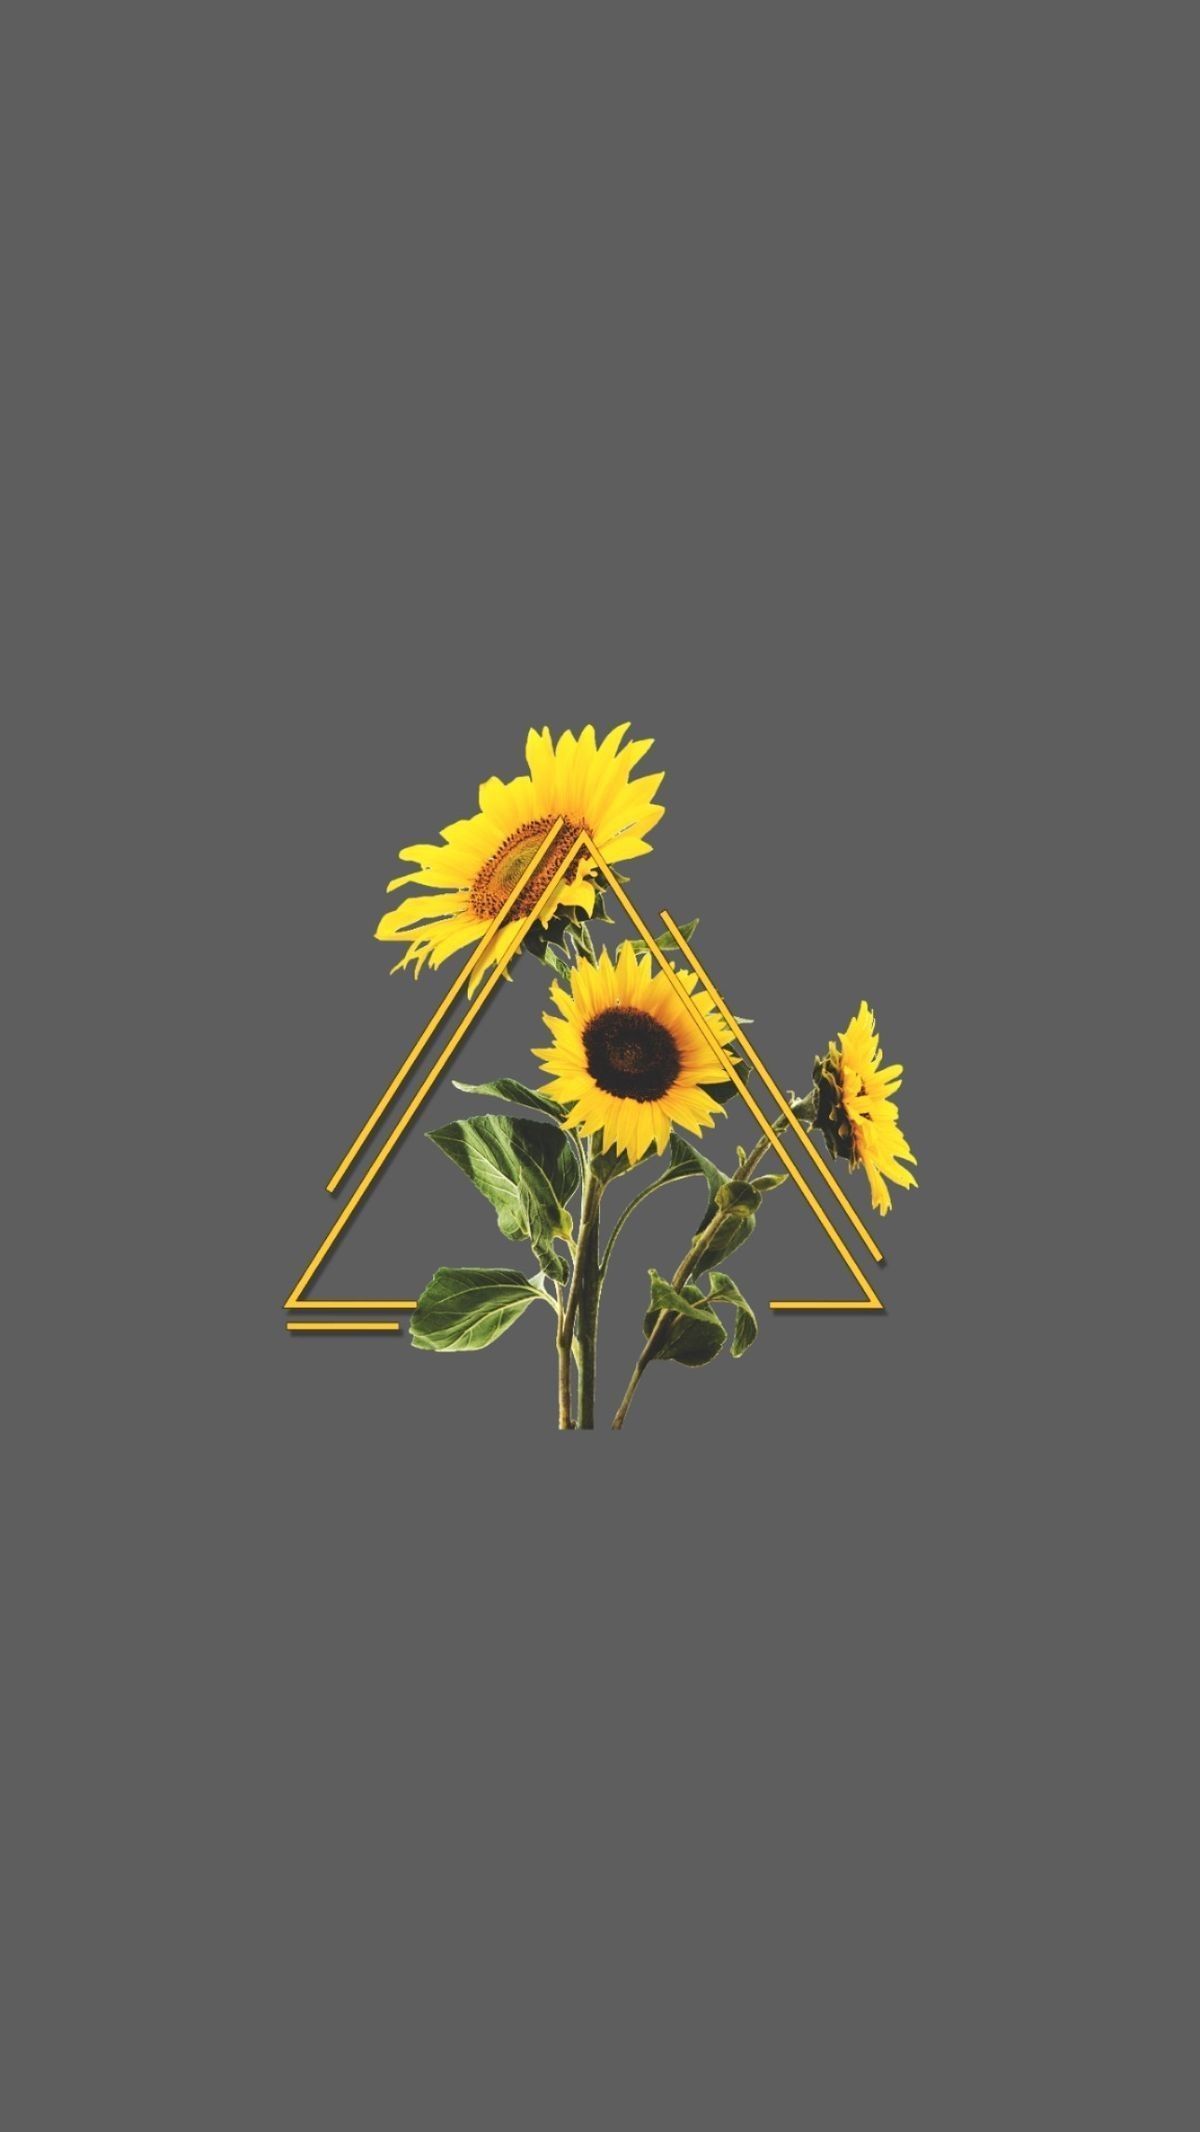 A sunflower logo with yellow flowers and triangle - Sunflower